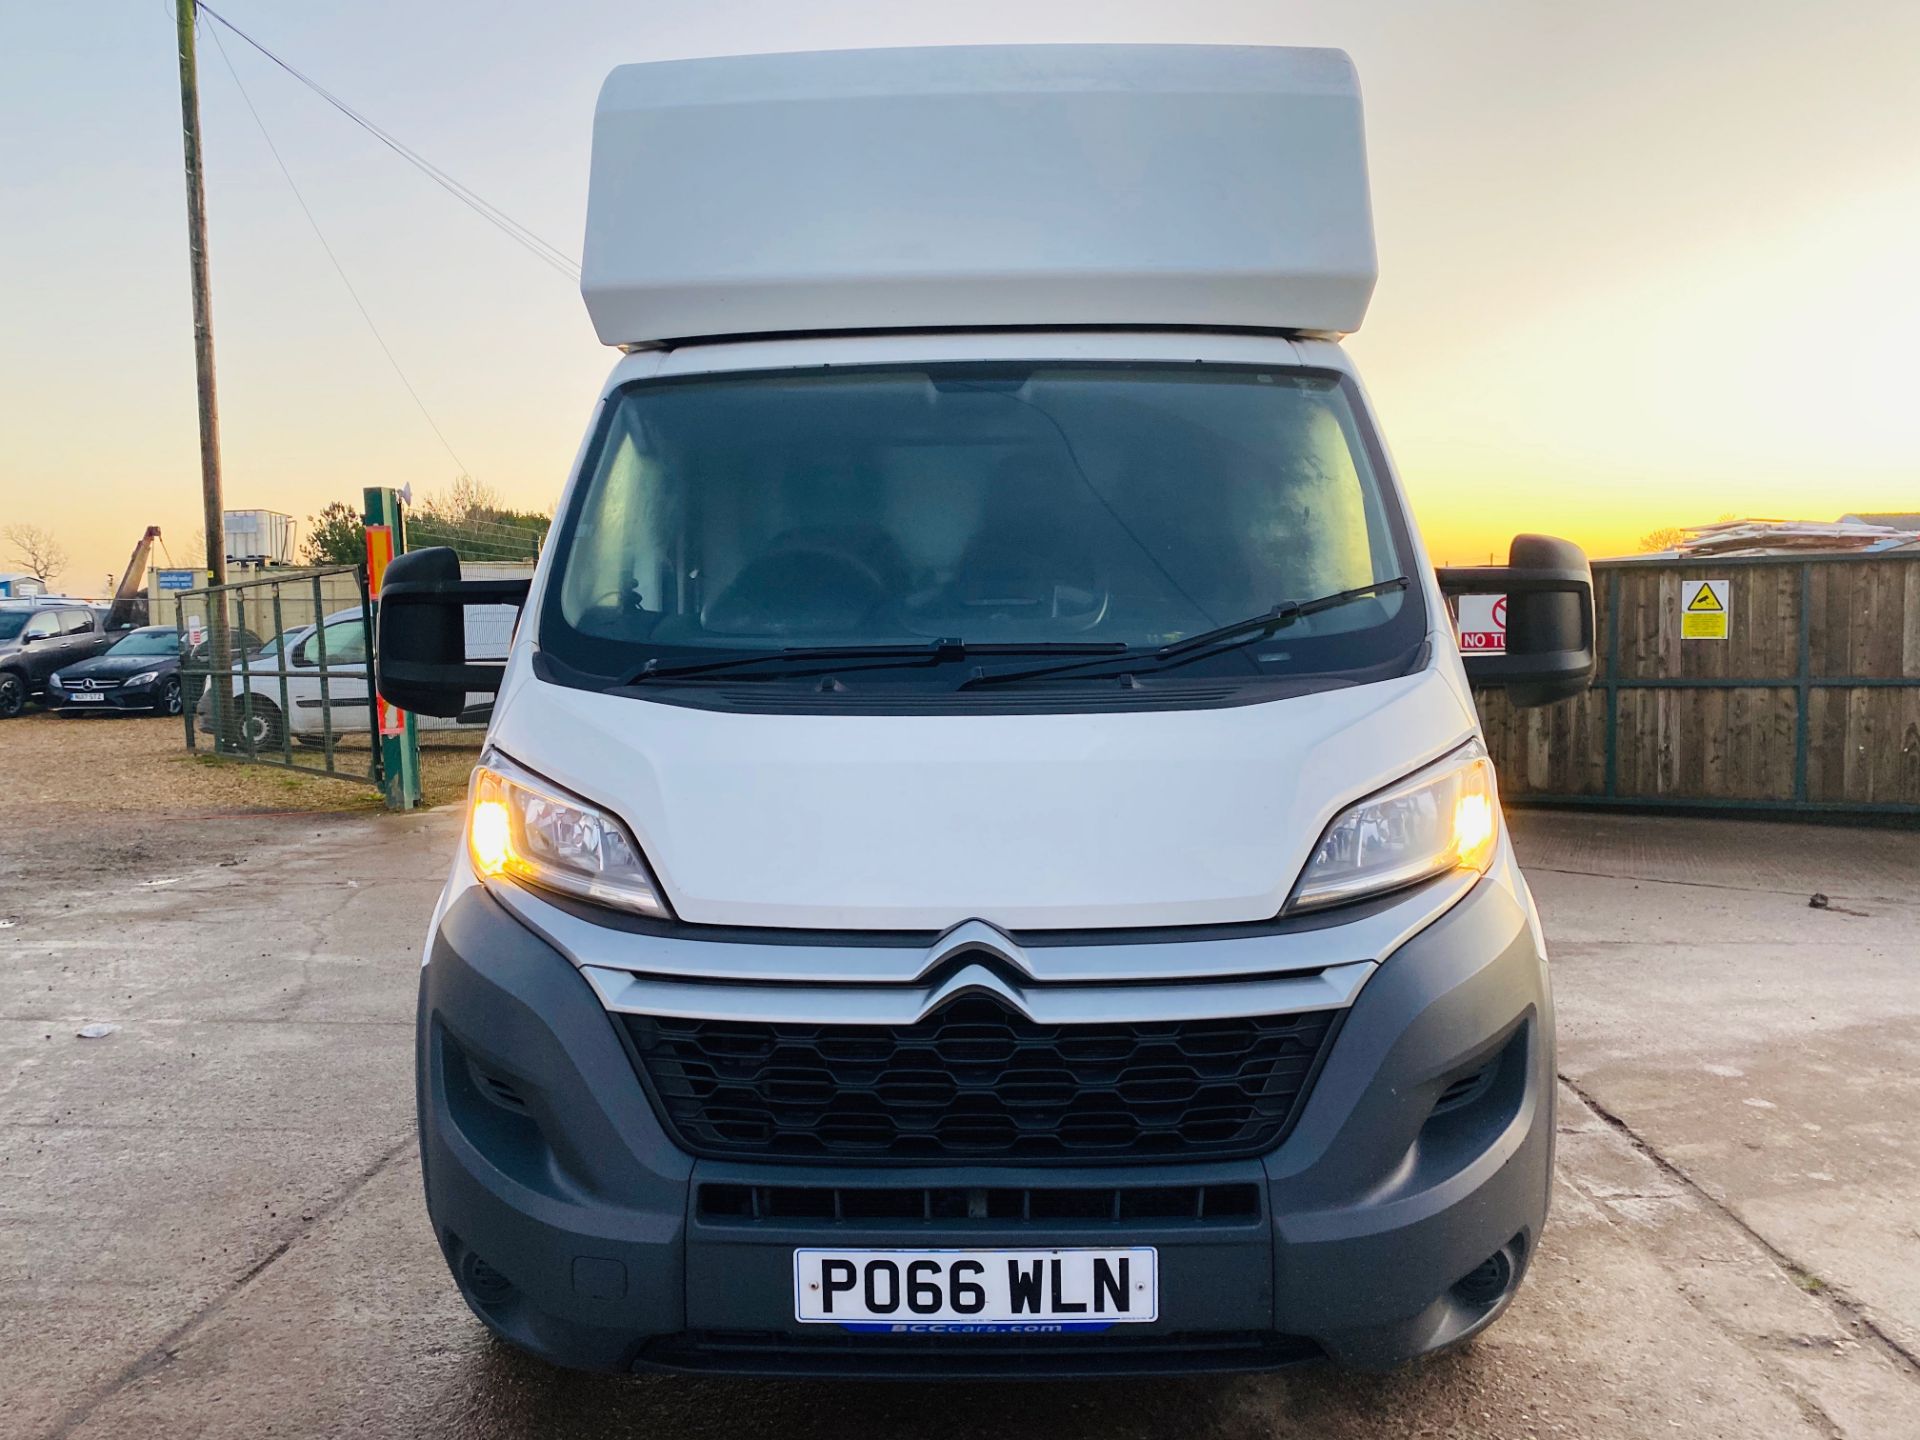 CITROEN RELAY 2.2HDI (130) EURO 6 LUTON BOX VAN WITH ELECTRIC TAIL LIFT - 2017 MODEL - LWB - AIR CON - Image 3 of 17